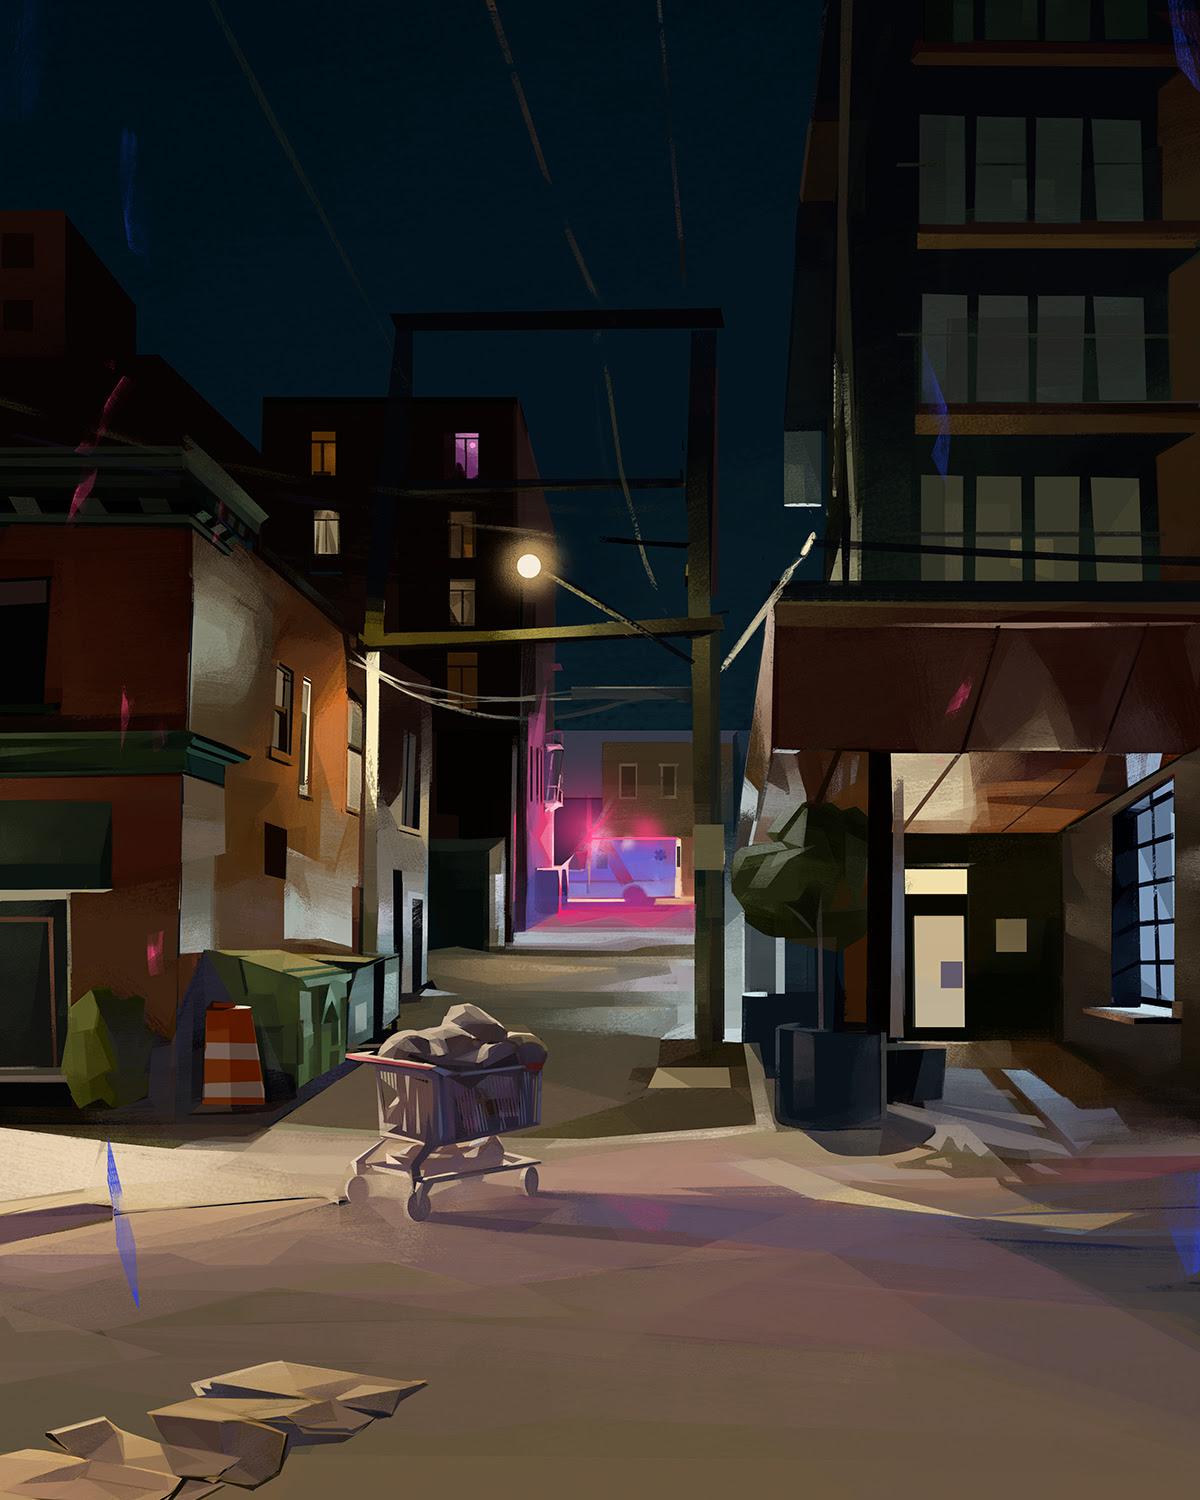 Illustration of an alley in a city centre at night. The pink lights from a parked ambulance light up the surrounding buildings, while an abandoned shopping cart sits in the foreground.